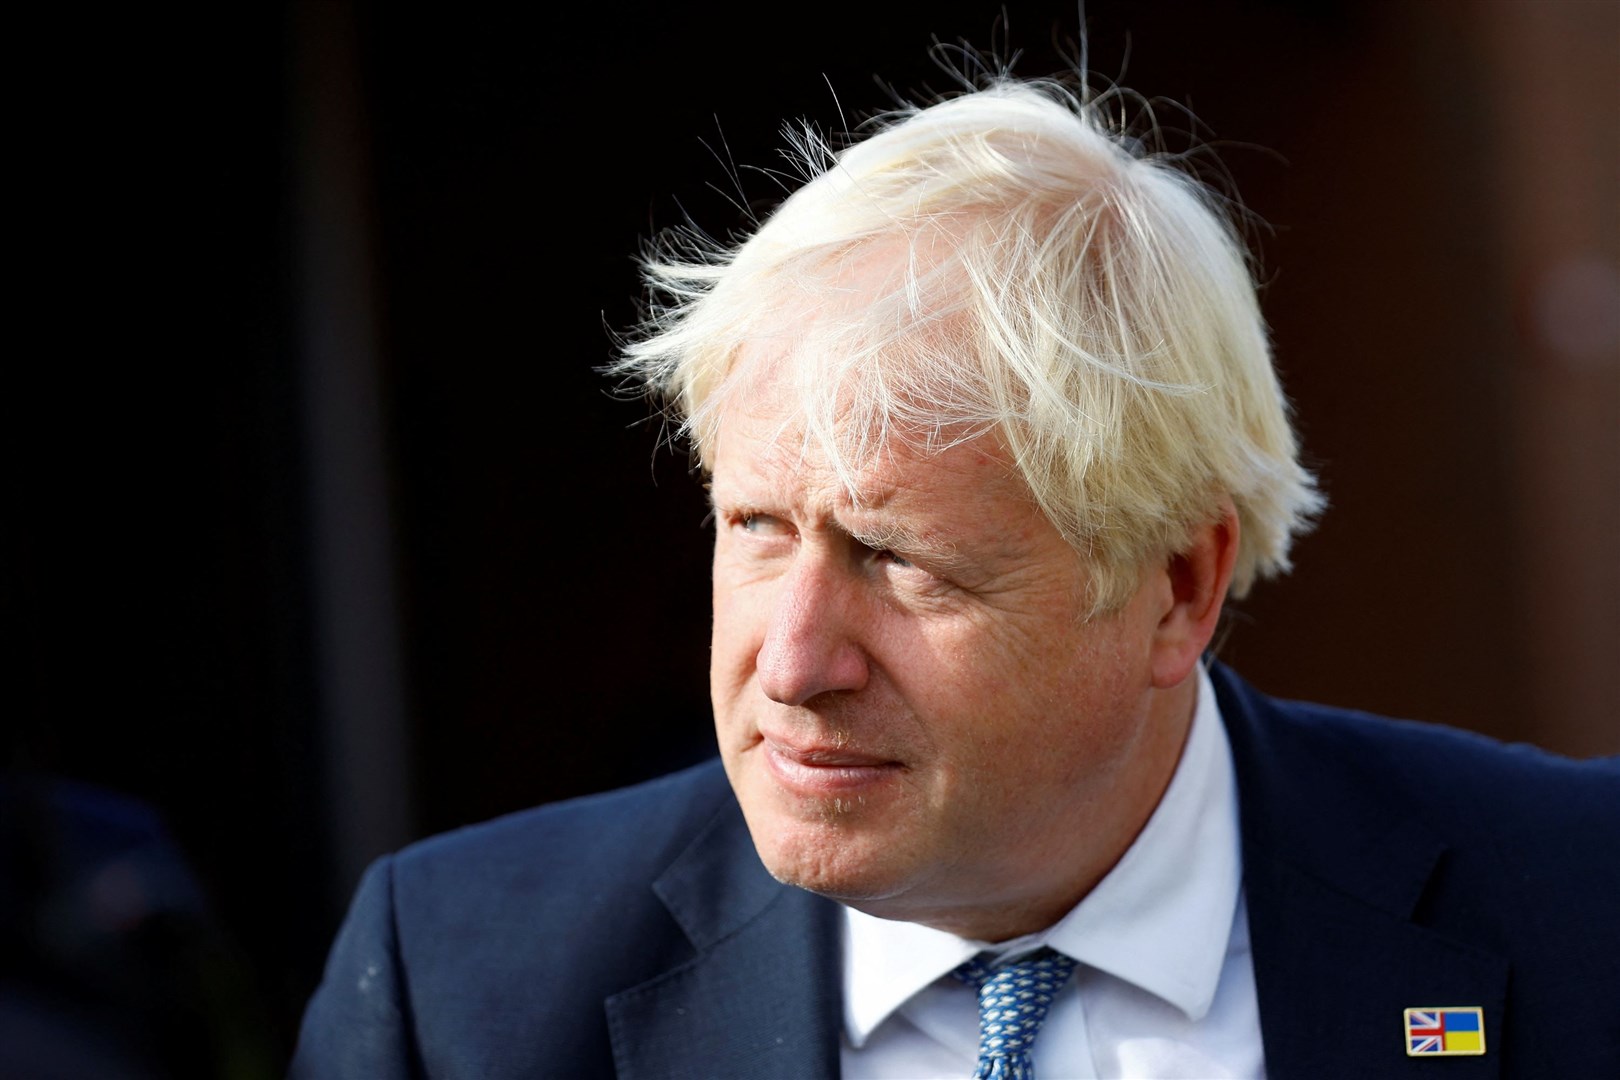 Boris Johnson’s handling of the complaints against Chris Pincher led to the end of his premiership (Andrew Boyers/PA)